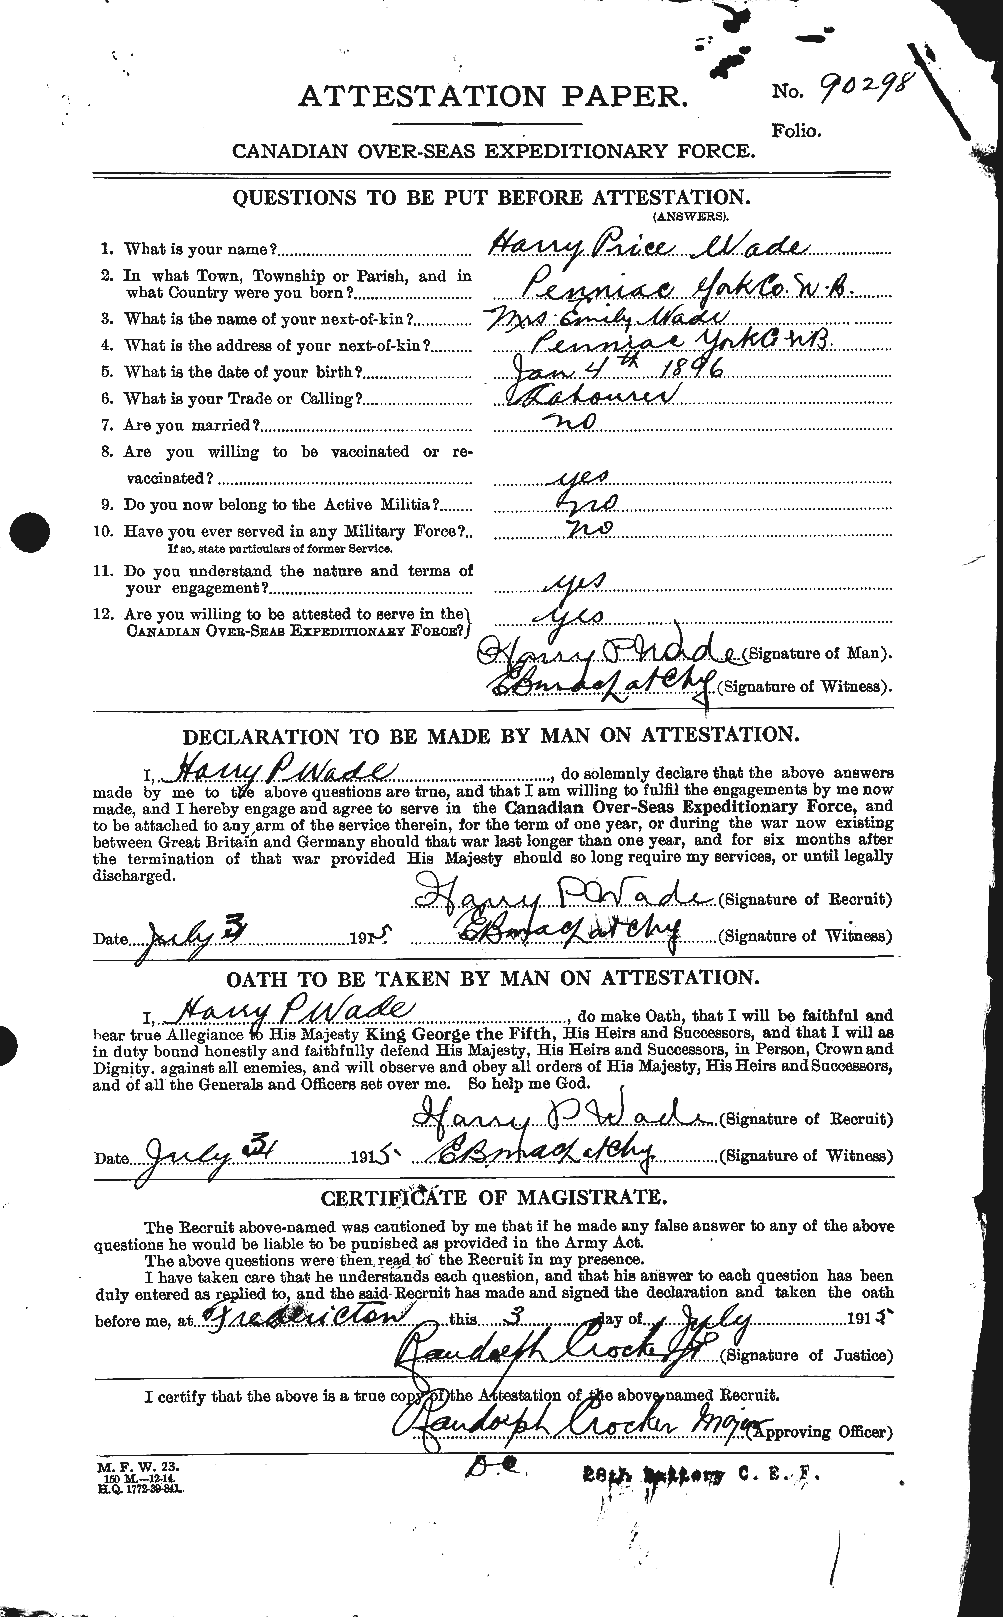 Personnel Records of the First World War - CEF 651228a